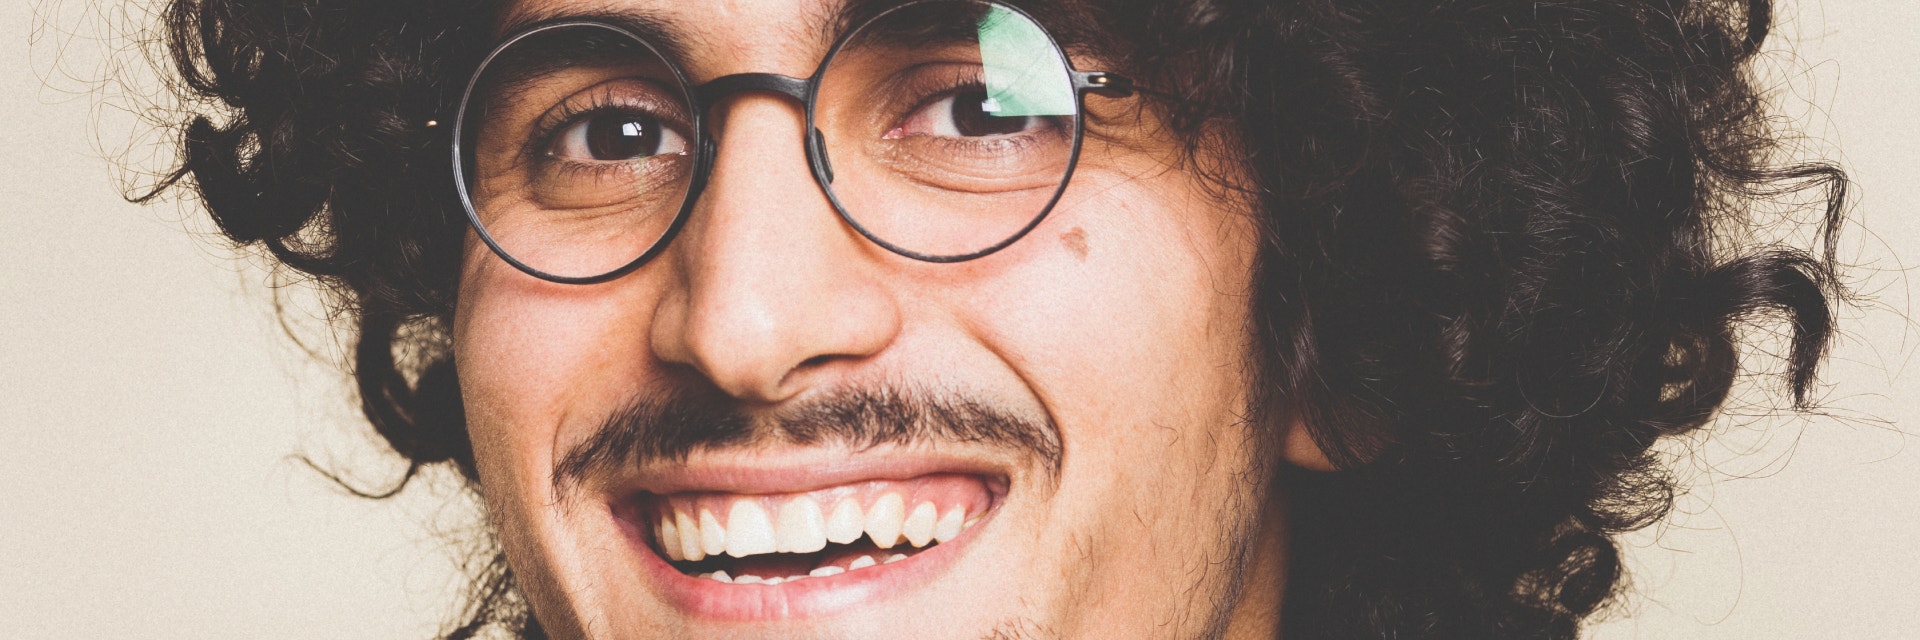 Man with curly hair and a mustache smiling while wearing 3D-printed weareannu eyeglasses